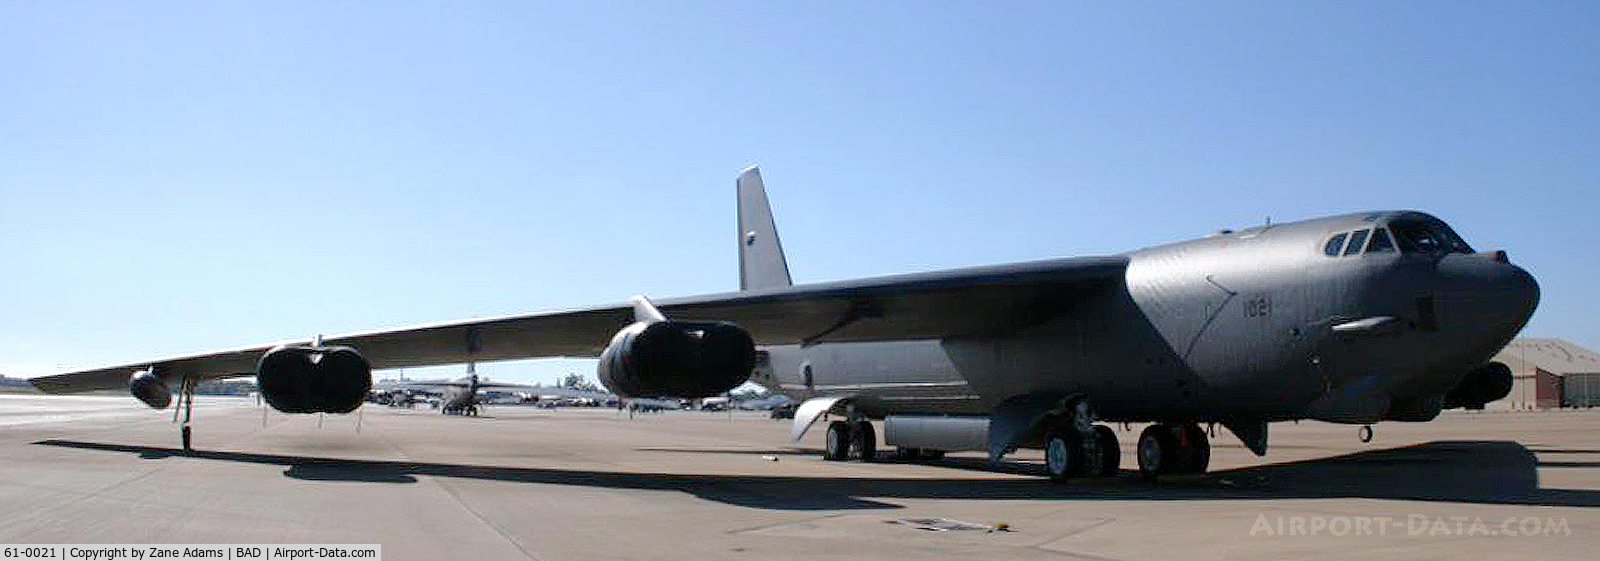 61-0021, 1961 Boeing B-52H Stratofortress C/N 464448, On the ramp at Barksdale AFB